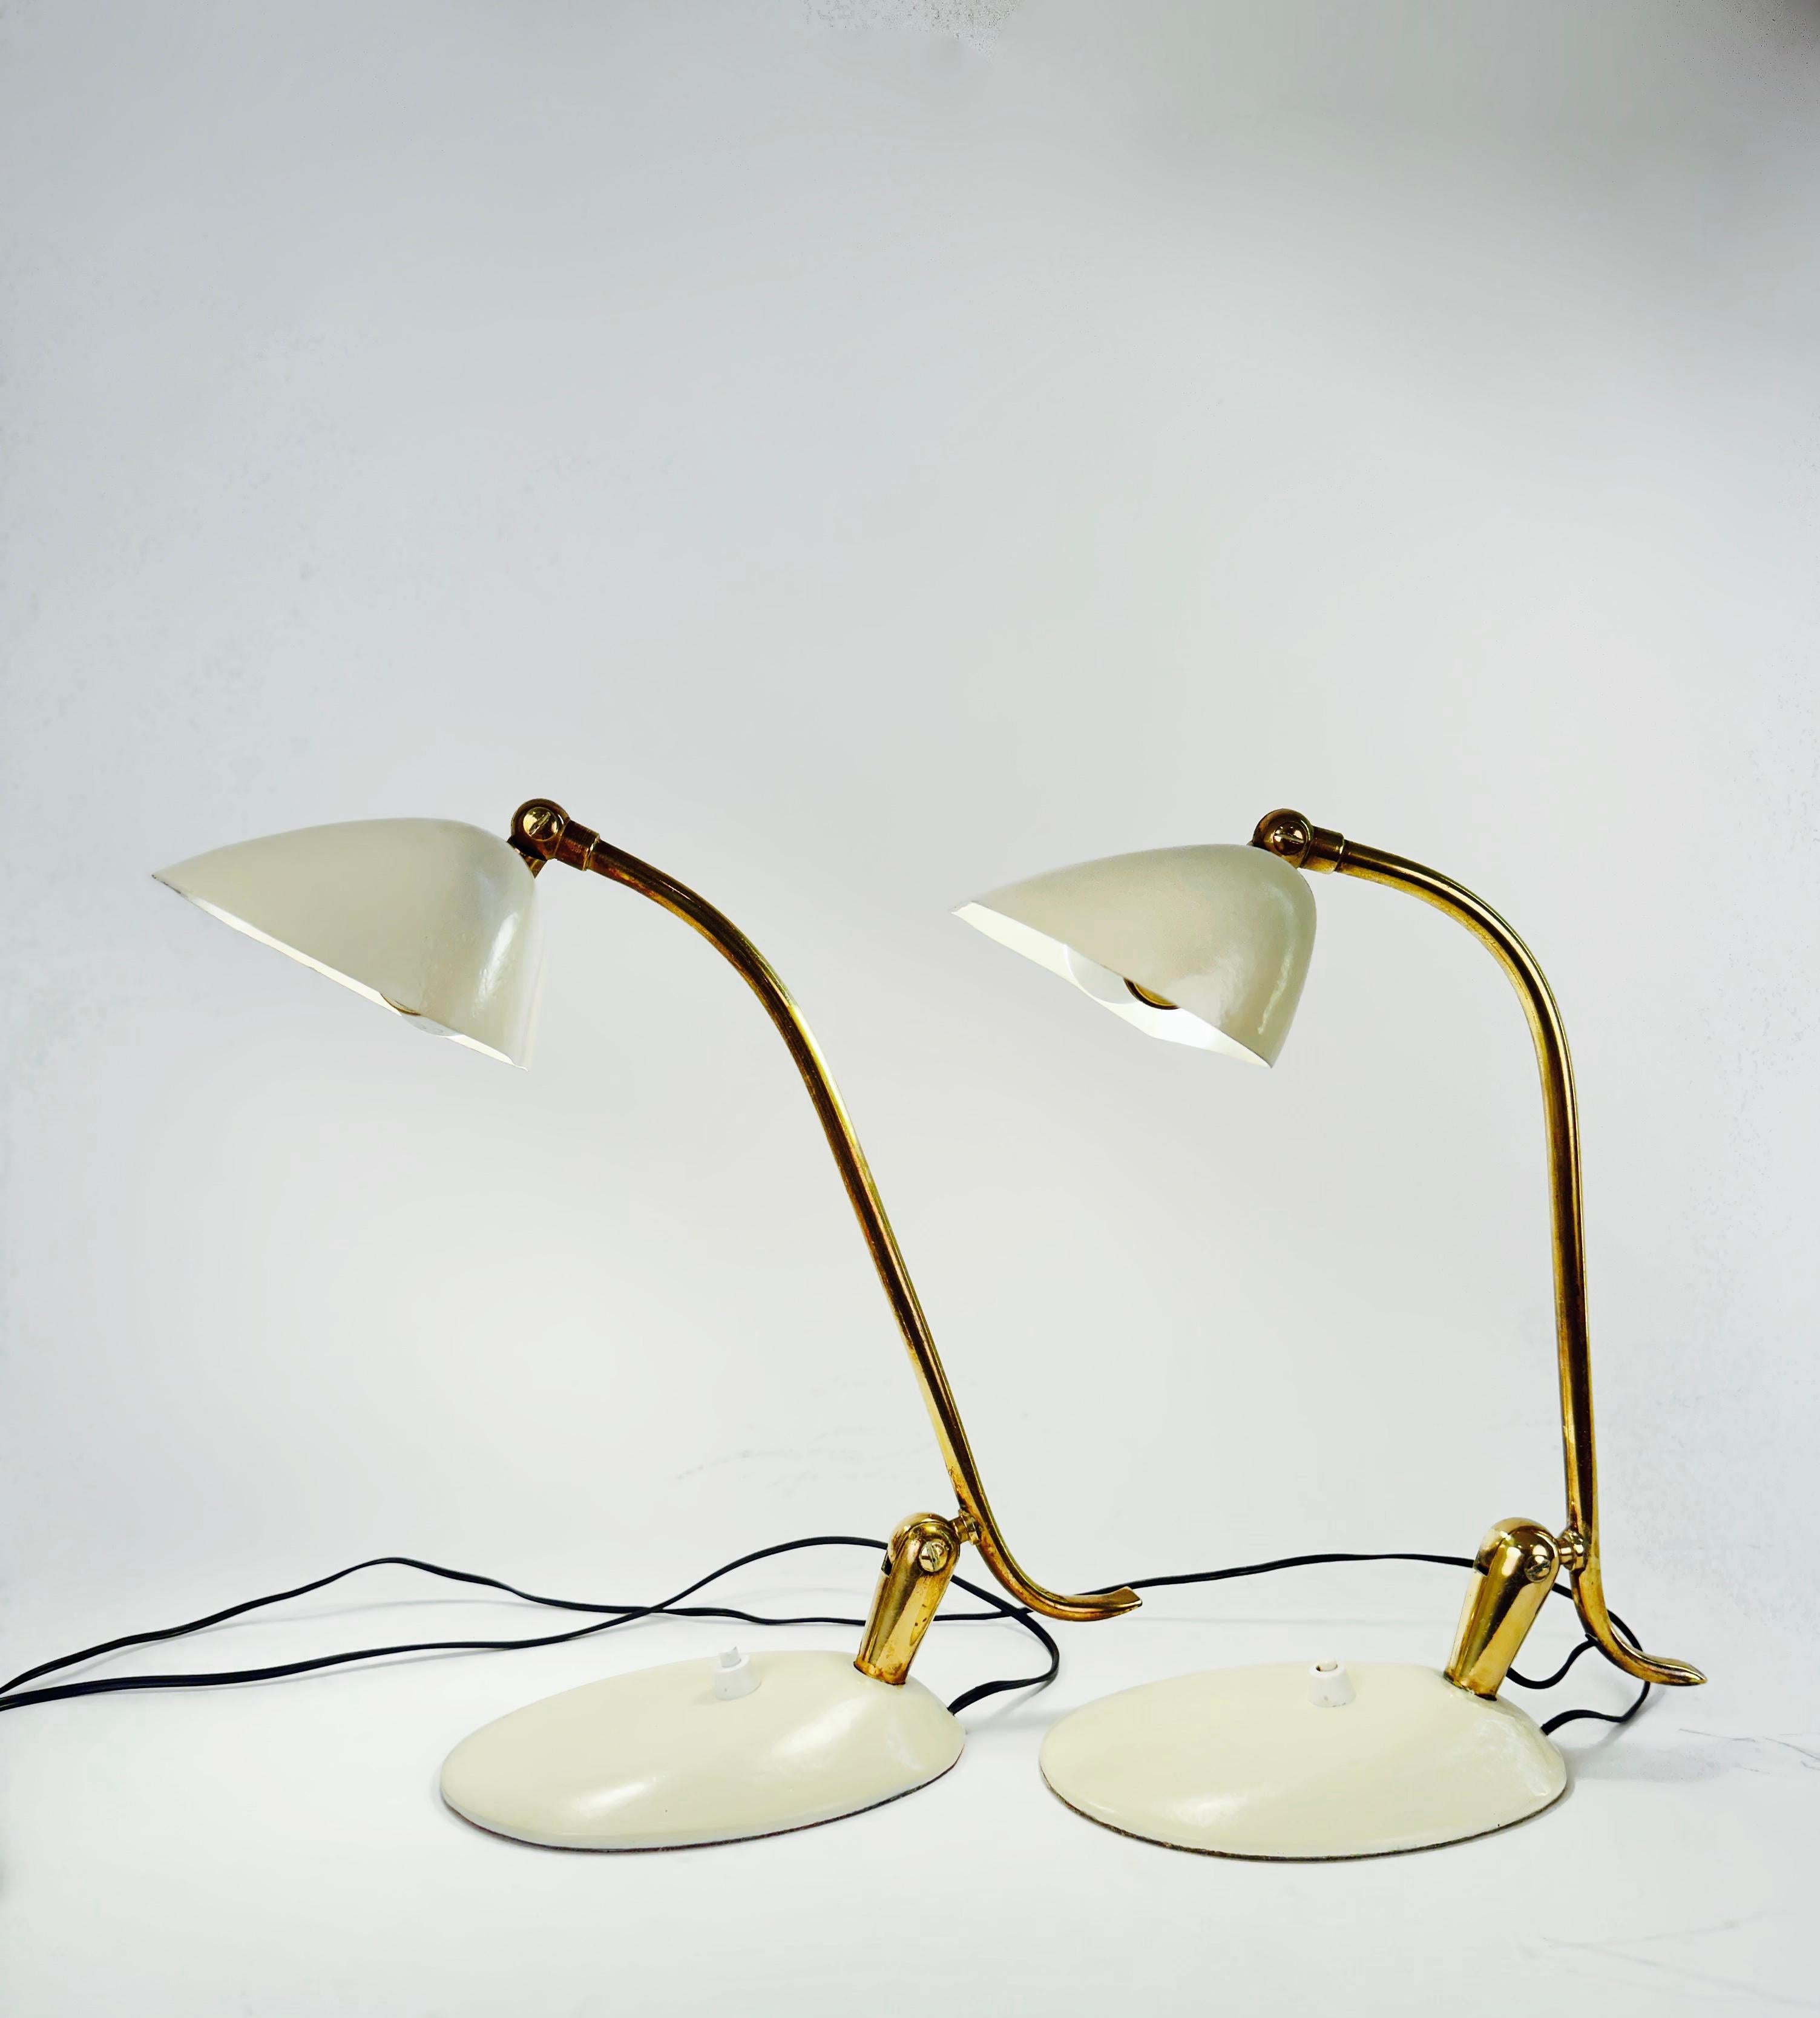 A pair of striking Stilnovo table lamps. Brass and enamelled metal. Excellent condition.